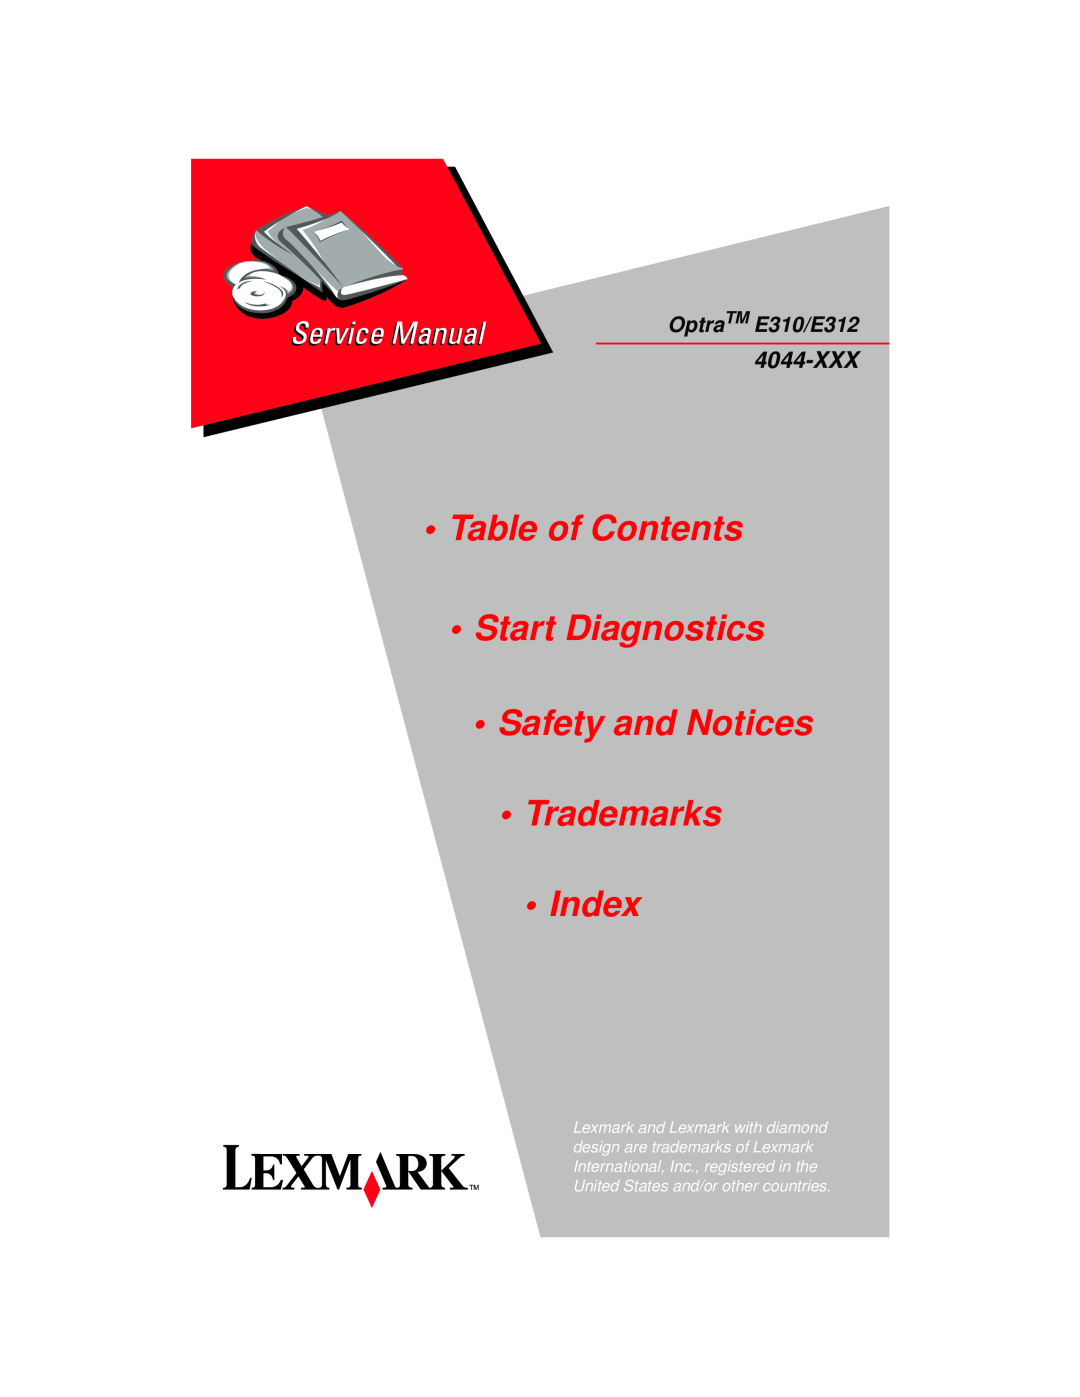 Lexmark manual OptraTM E310/E312, •Table of Contents •Start Diagnostics, •Safety and Notices •Trademarks • Index 